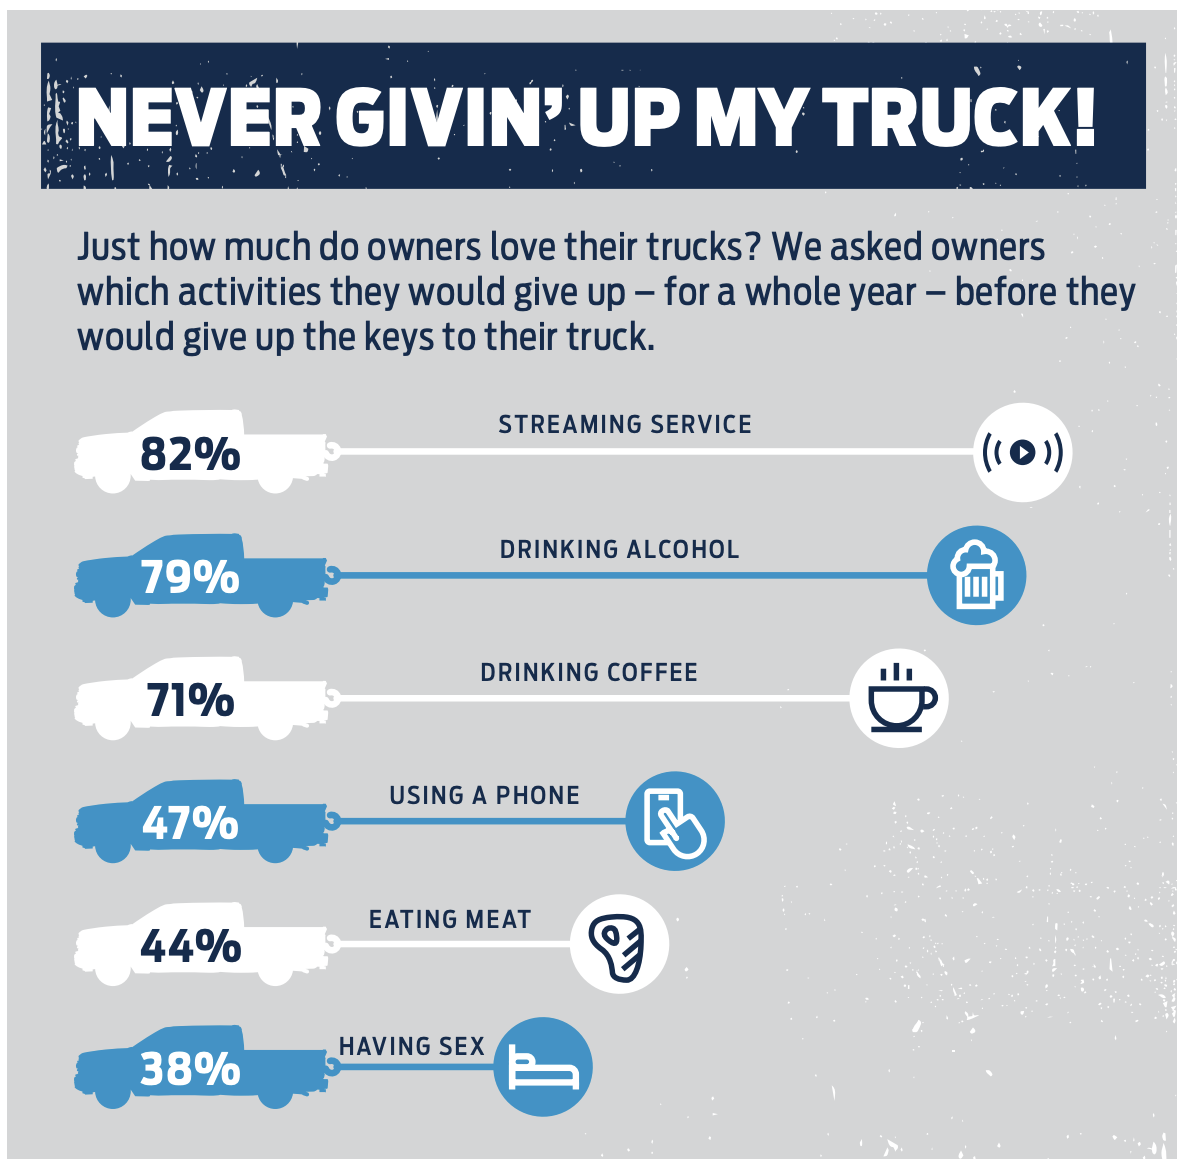 Ford Motor's survey on what Americans are willing to give up for a pickup truck has thrown up interesting results.